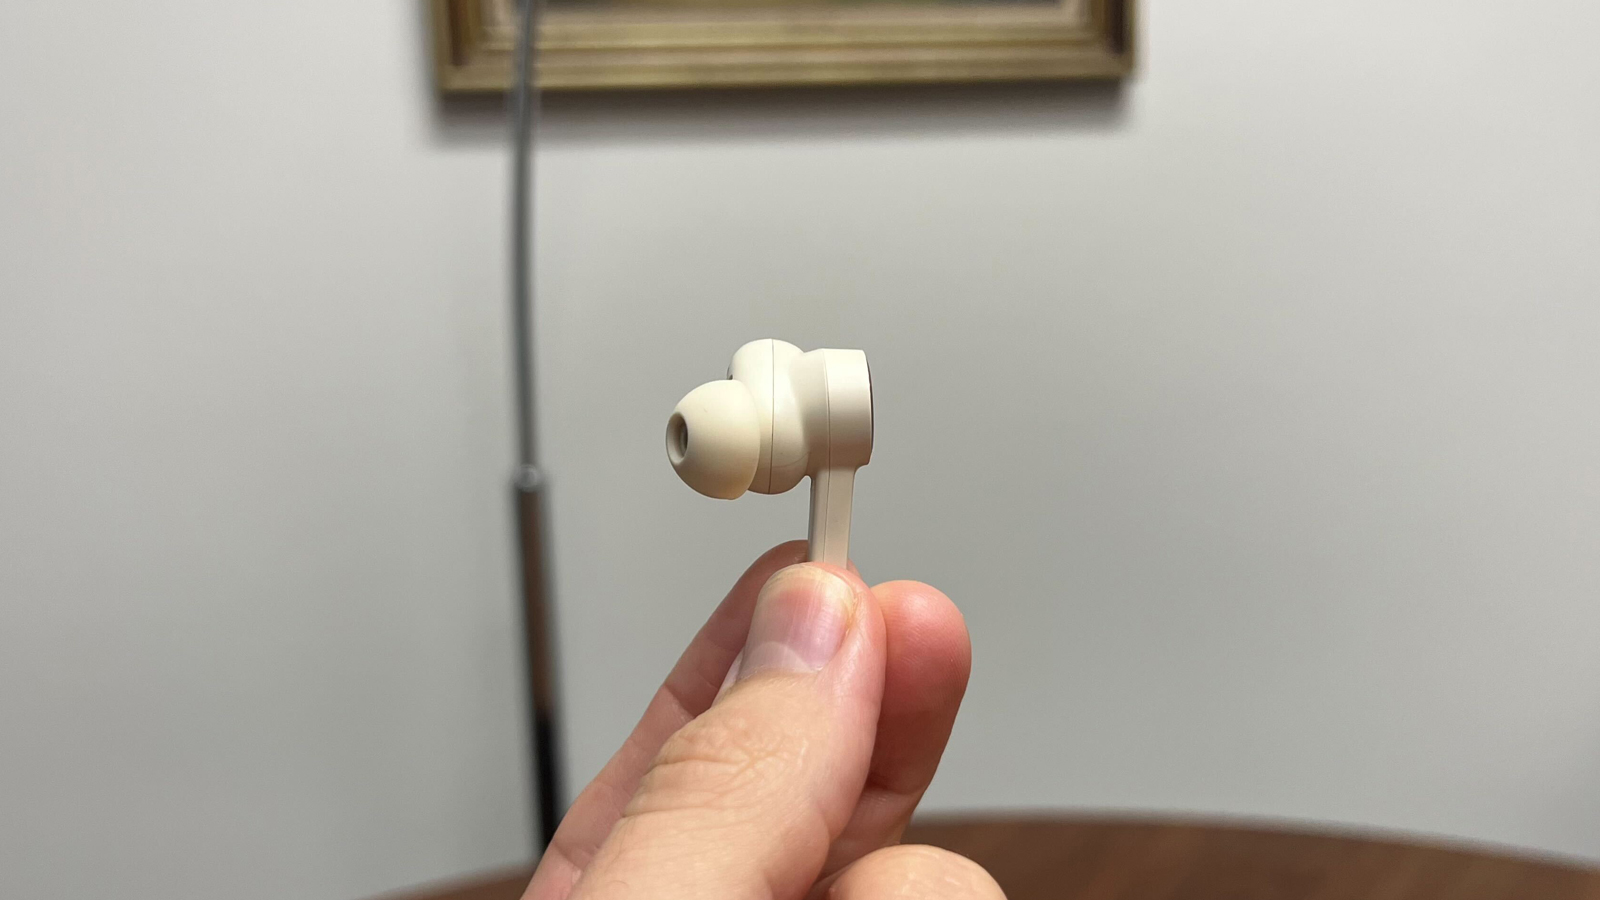 B&O Beoplay EX left earbud in profile